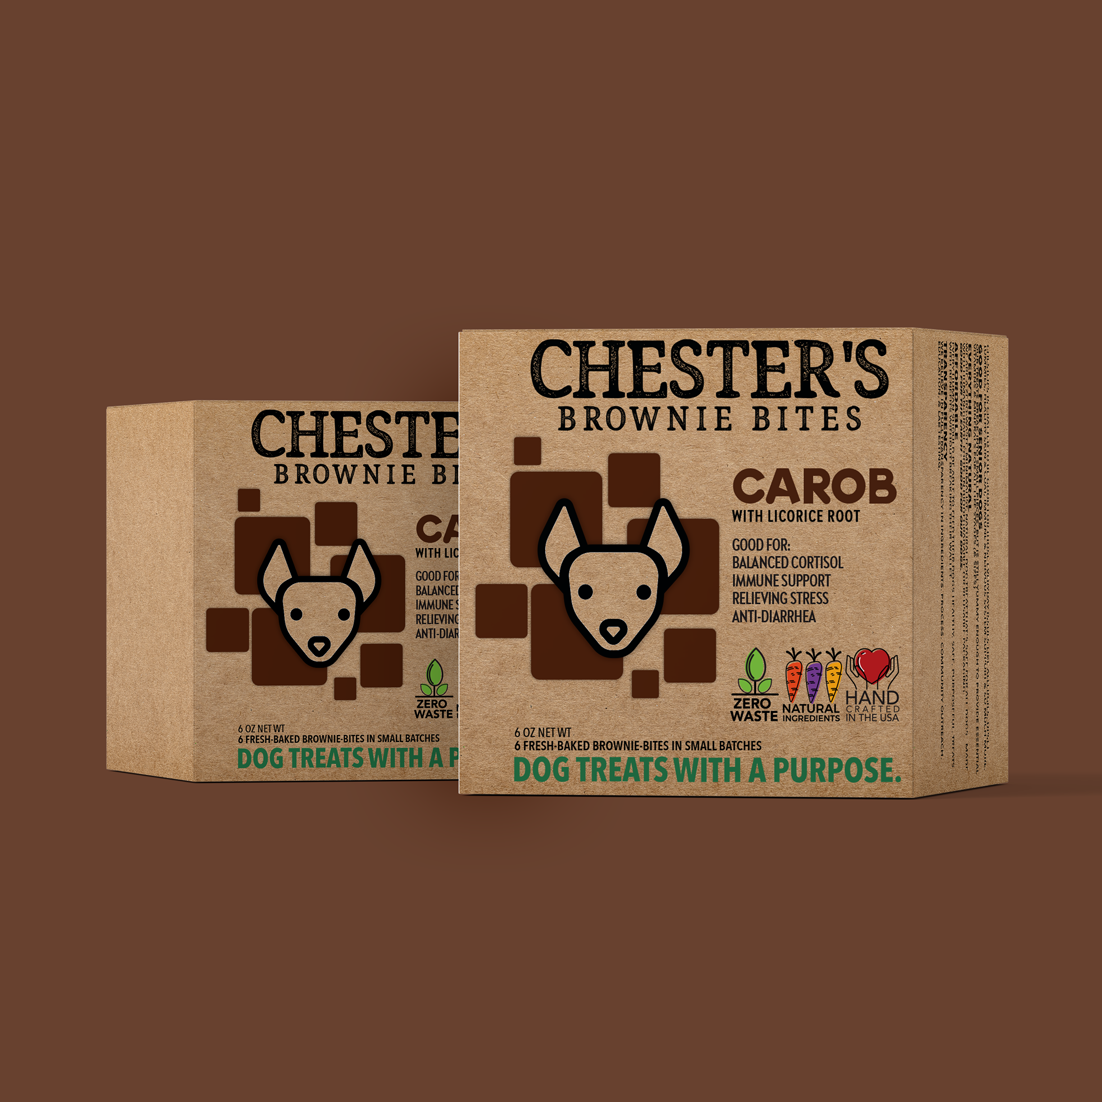 CHESTER'S BROWNIE BITES DOG TREATS FOR CORTISOL SUPPORT